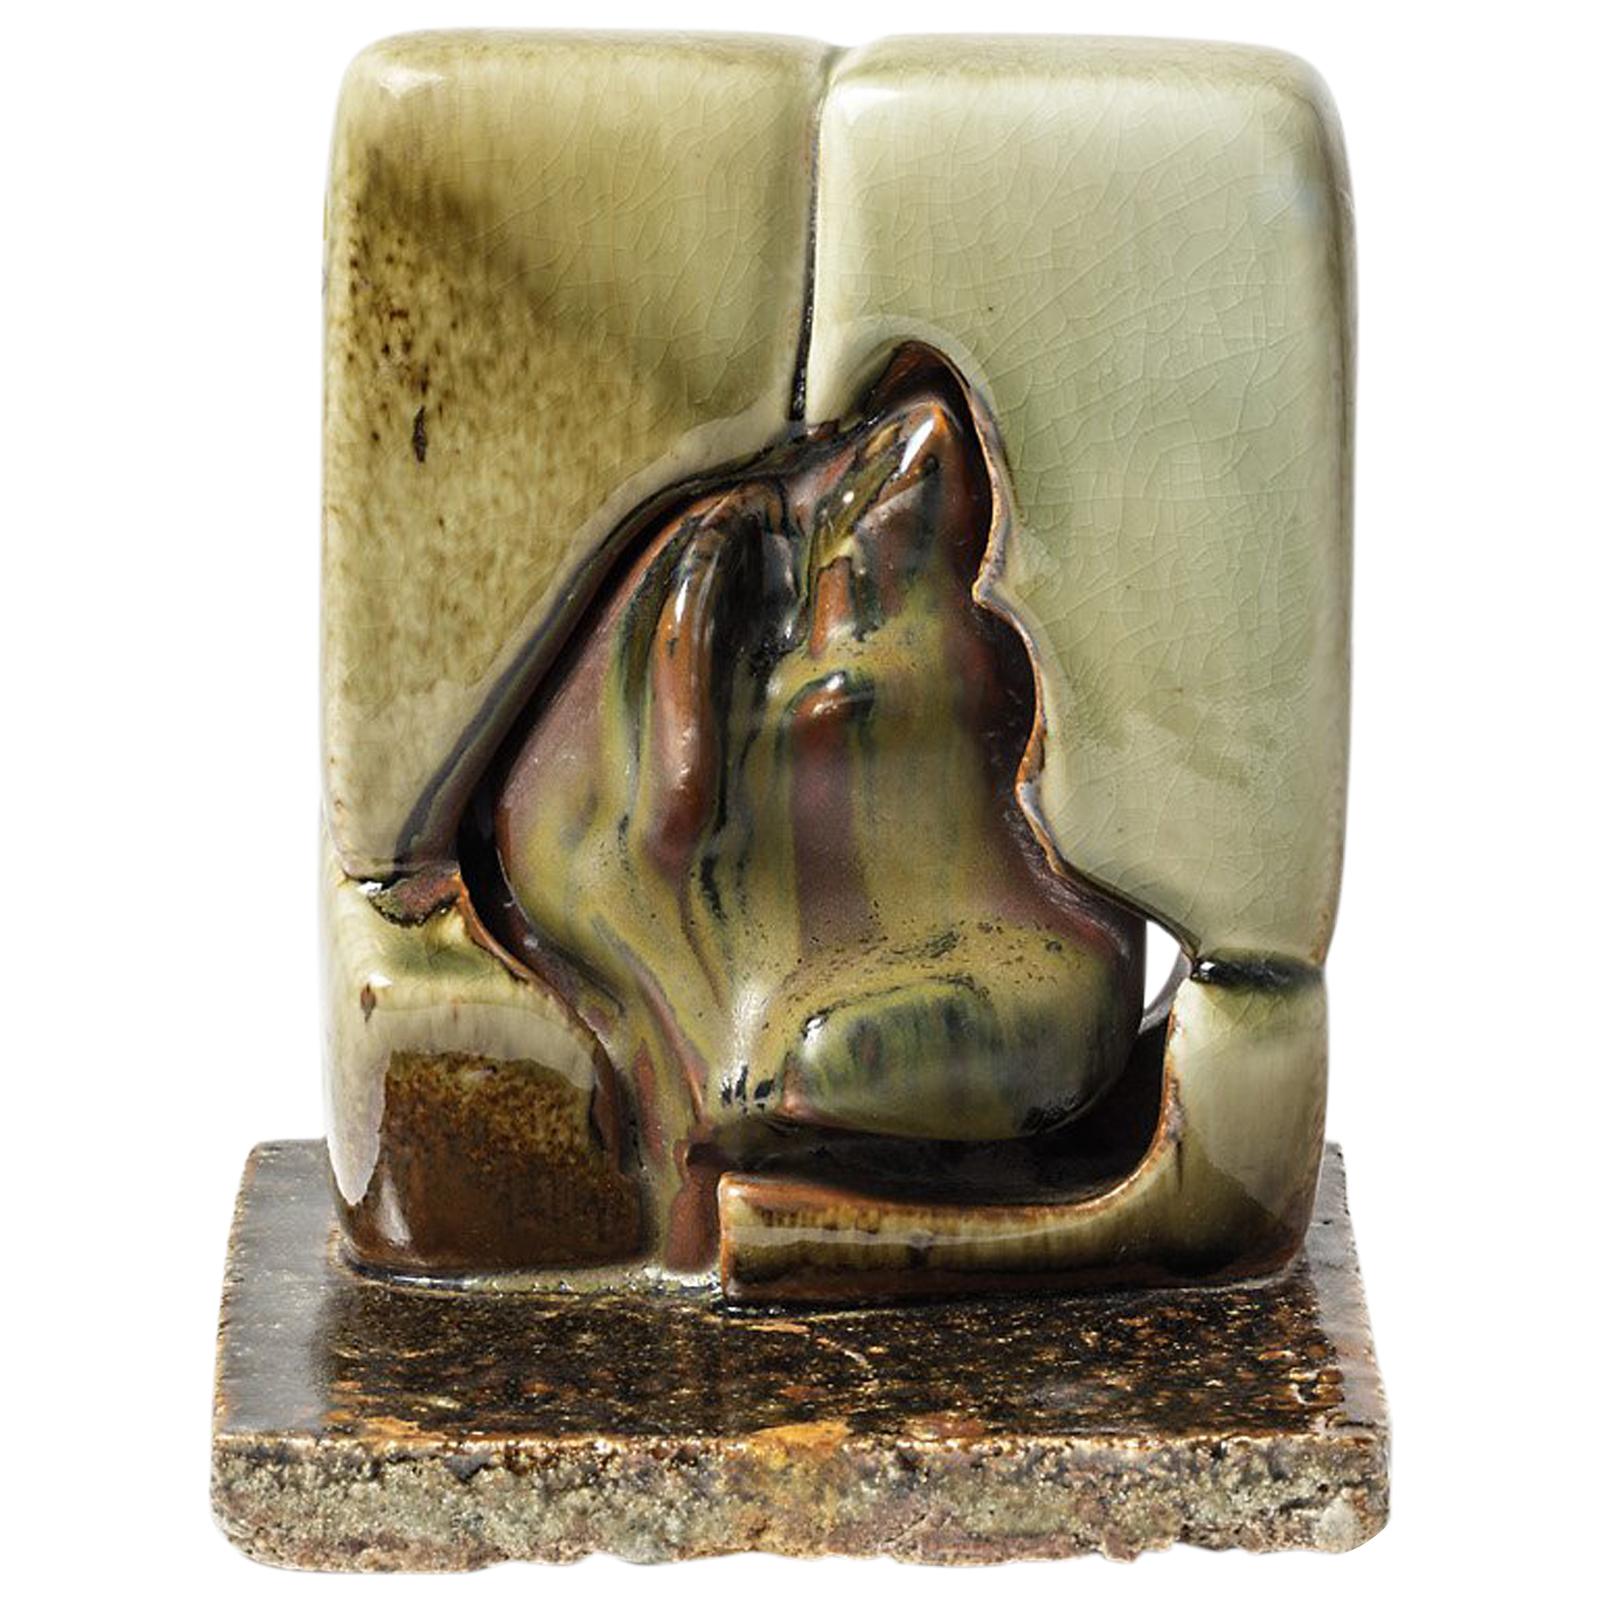 Ceramic Sculpture with Green- Brown Glazes Decoration by Tim Orr, 1970